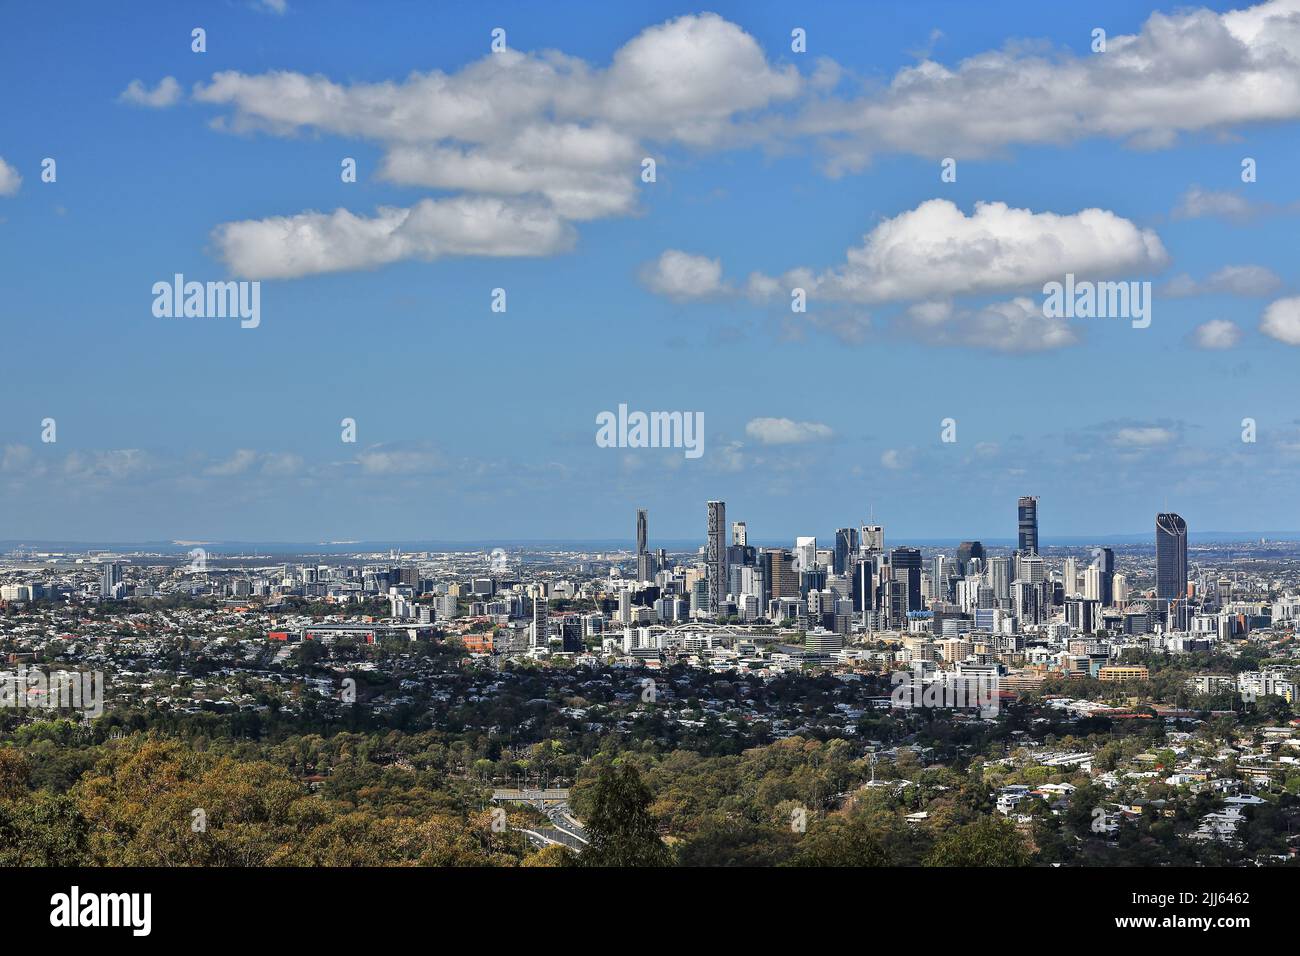 094 Cityscape with the CBD skyscrpers seen from the Mount Coot-tha Lookout. Brisbane-Australia. Stock Photo